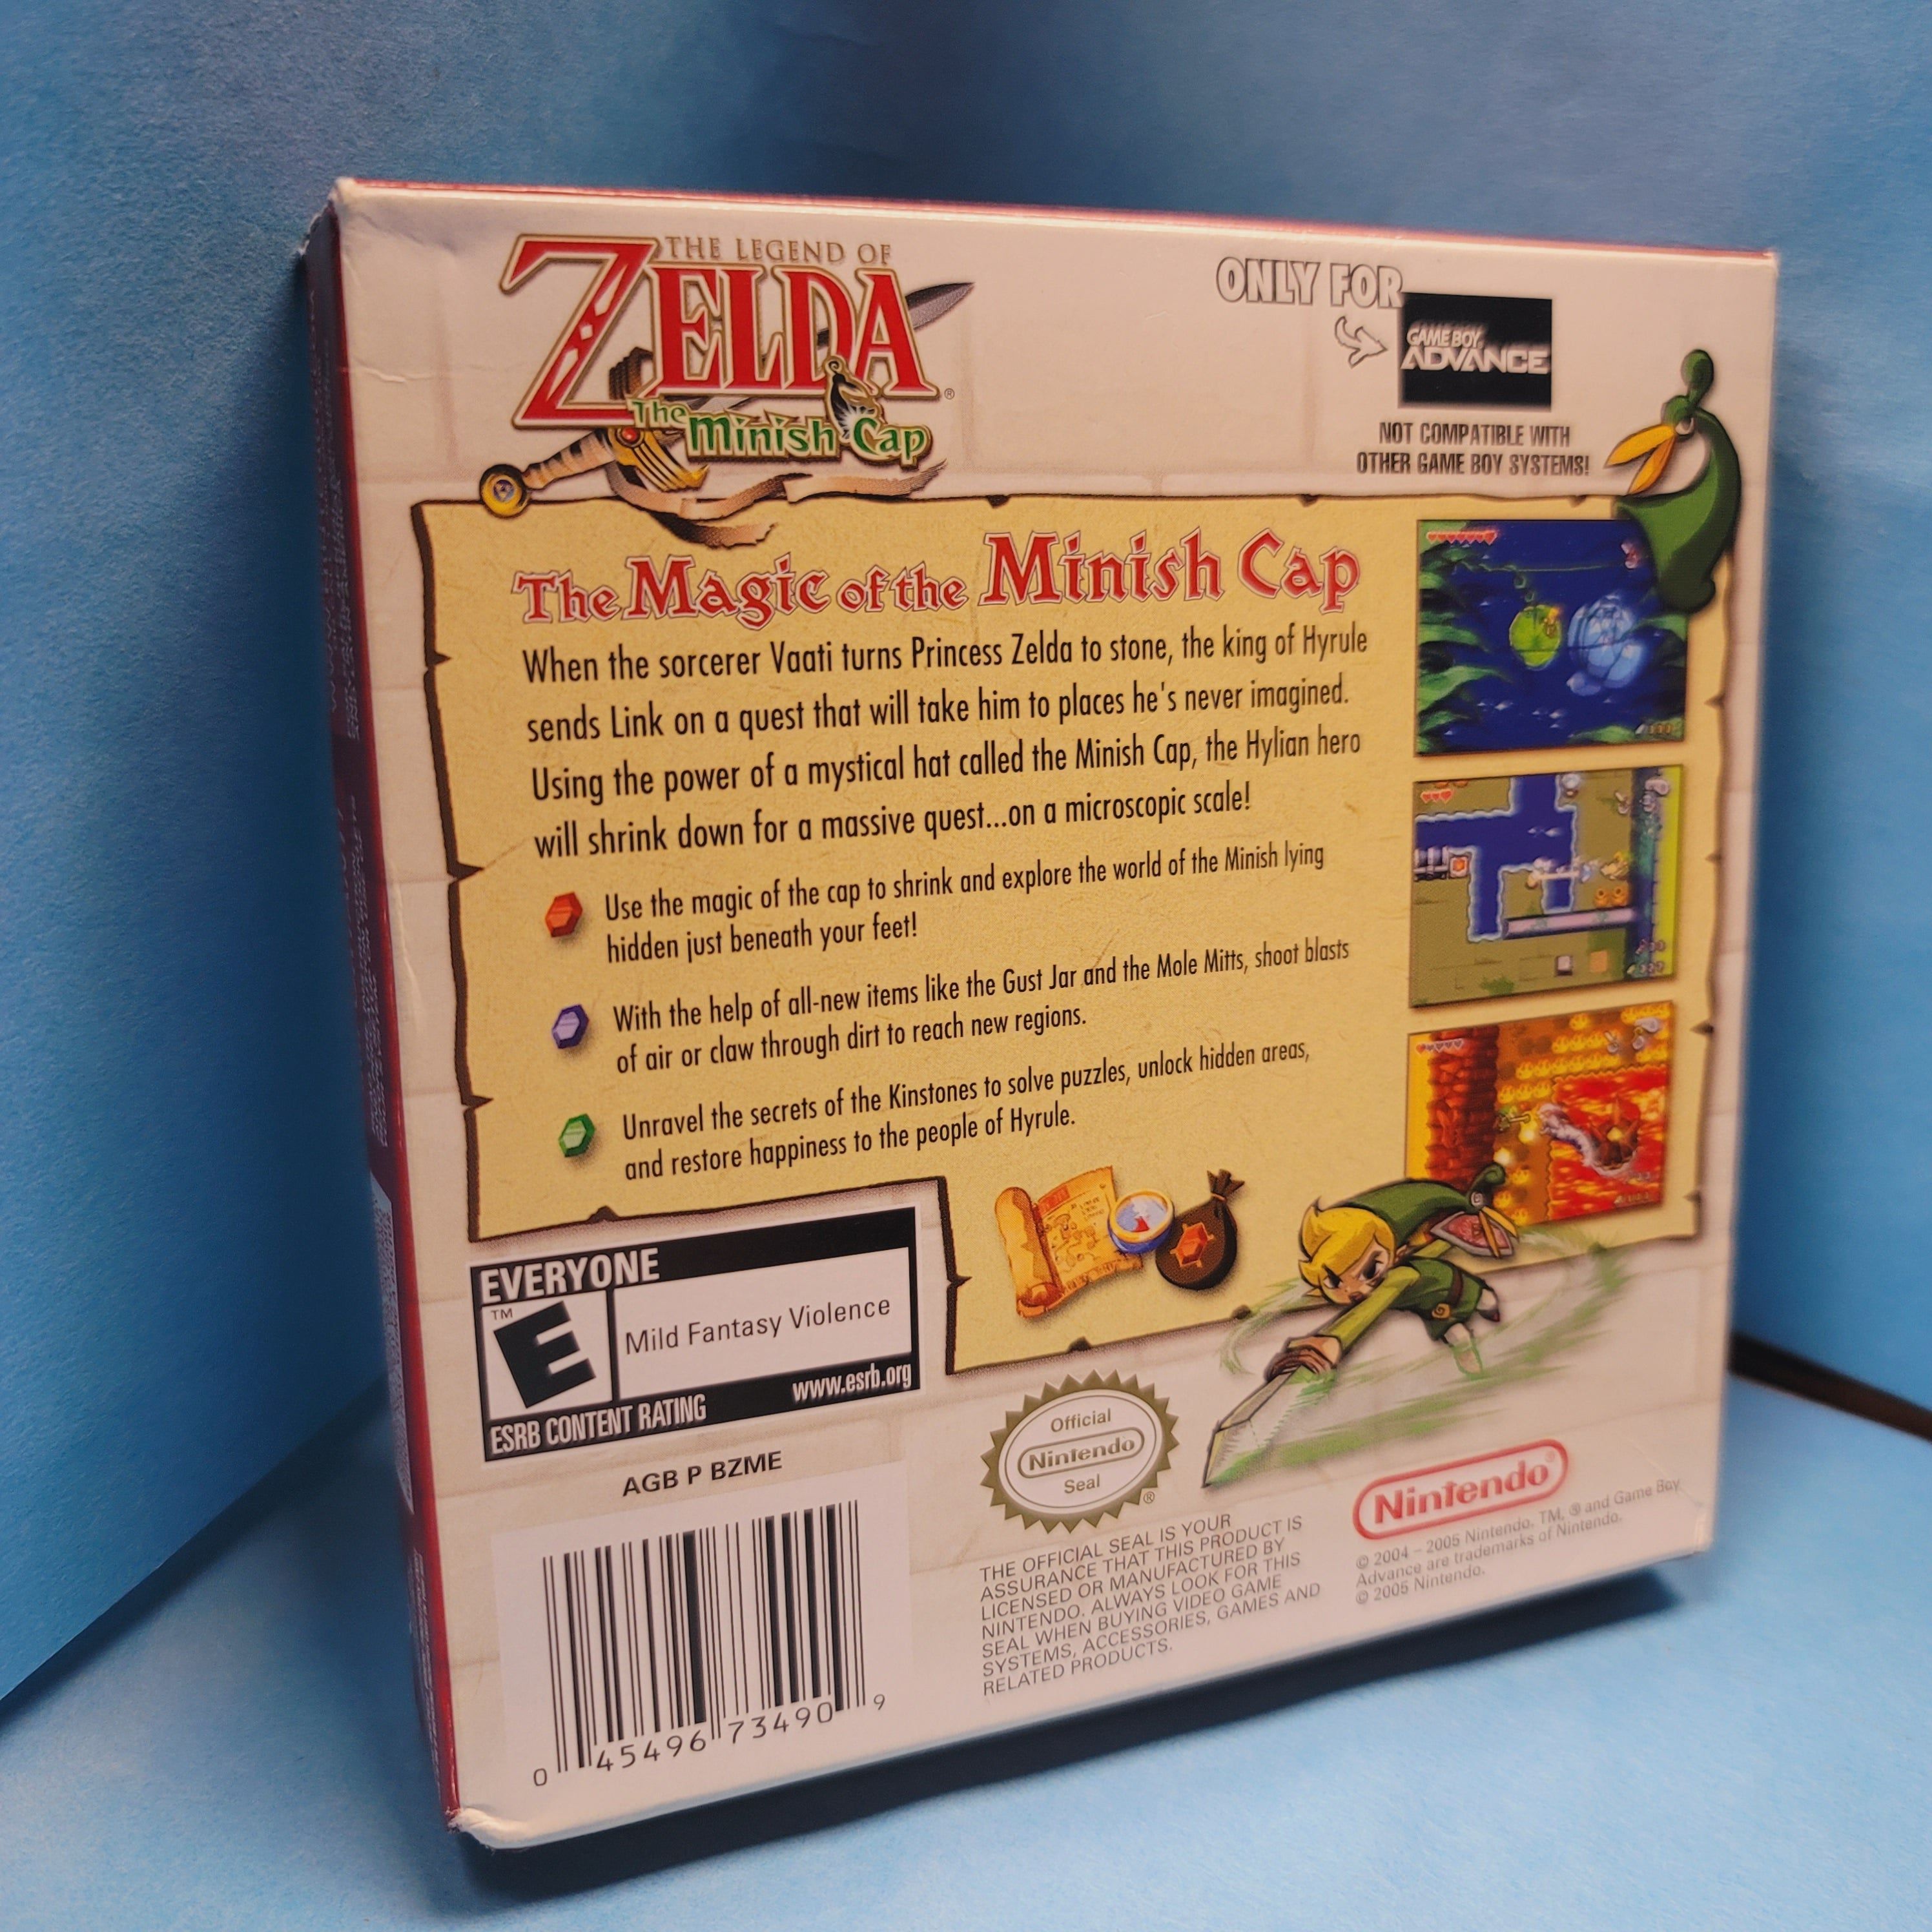 GBA - The Legend of Zelda The Minish Cap (Complete in Box / A+ / With Manual)